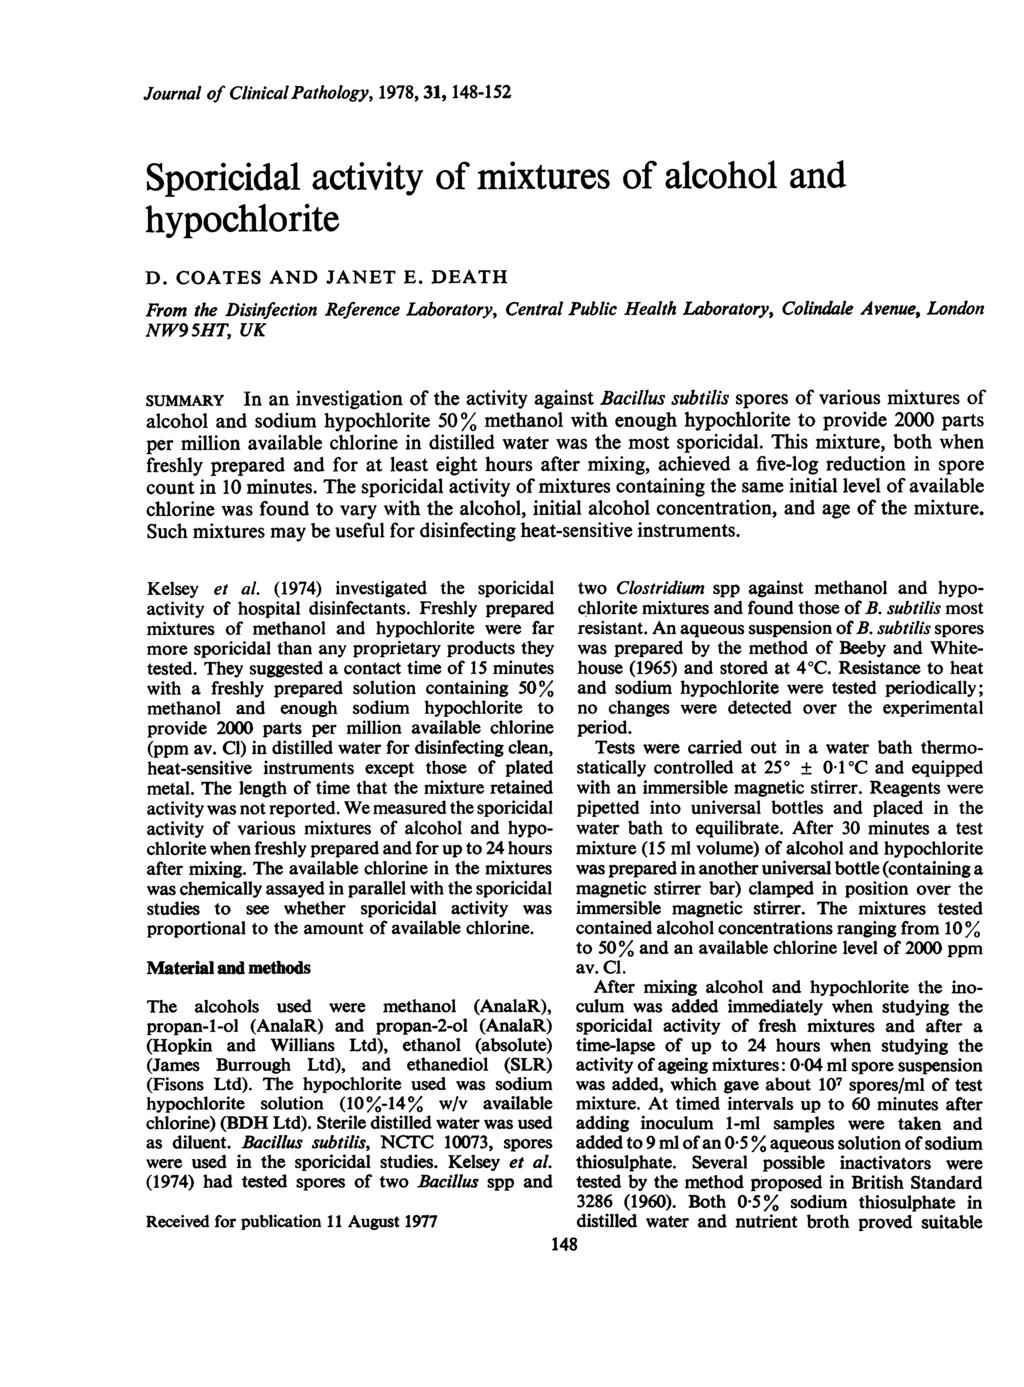 Journal of Clinical Pathology, 1978, 31, 148-152 Sporicidal activity of mixtures of alcohol and hypochlorite D. COATES AND JANET E.